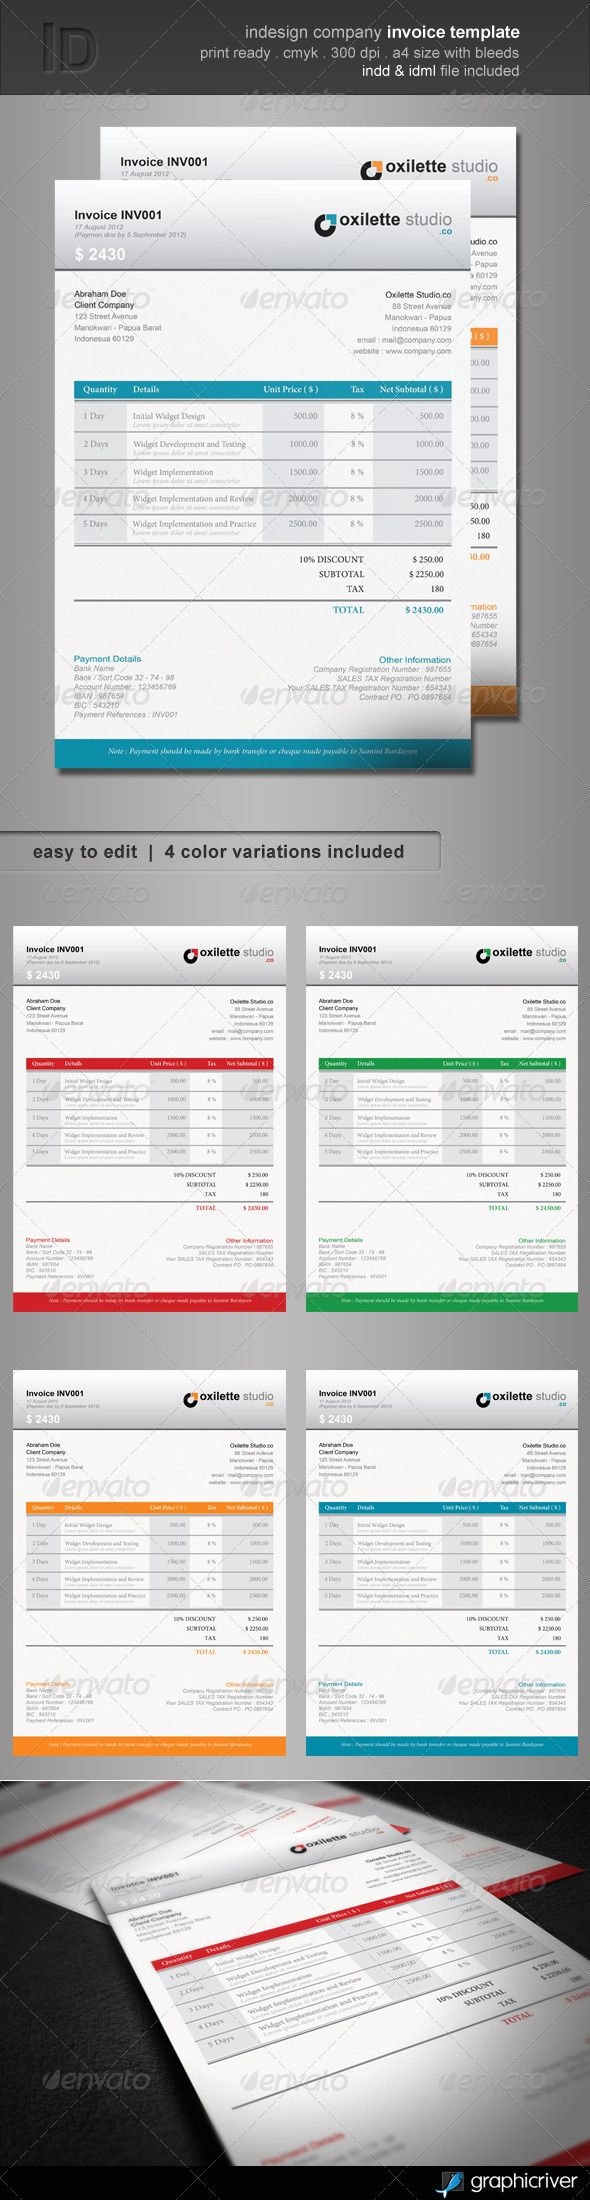 indesign invoice template indesign company invoice template graphicriver features clean 590 X 2200